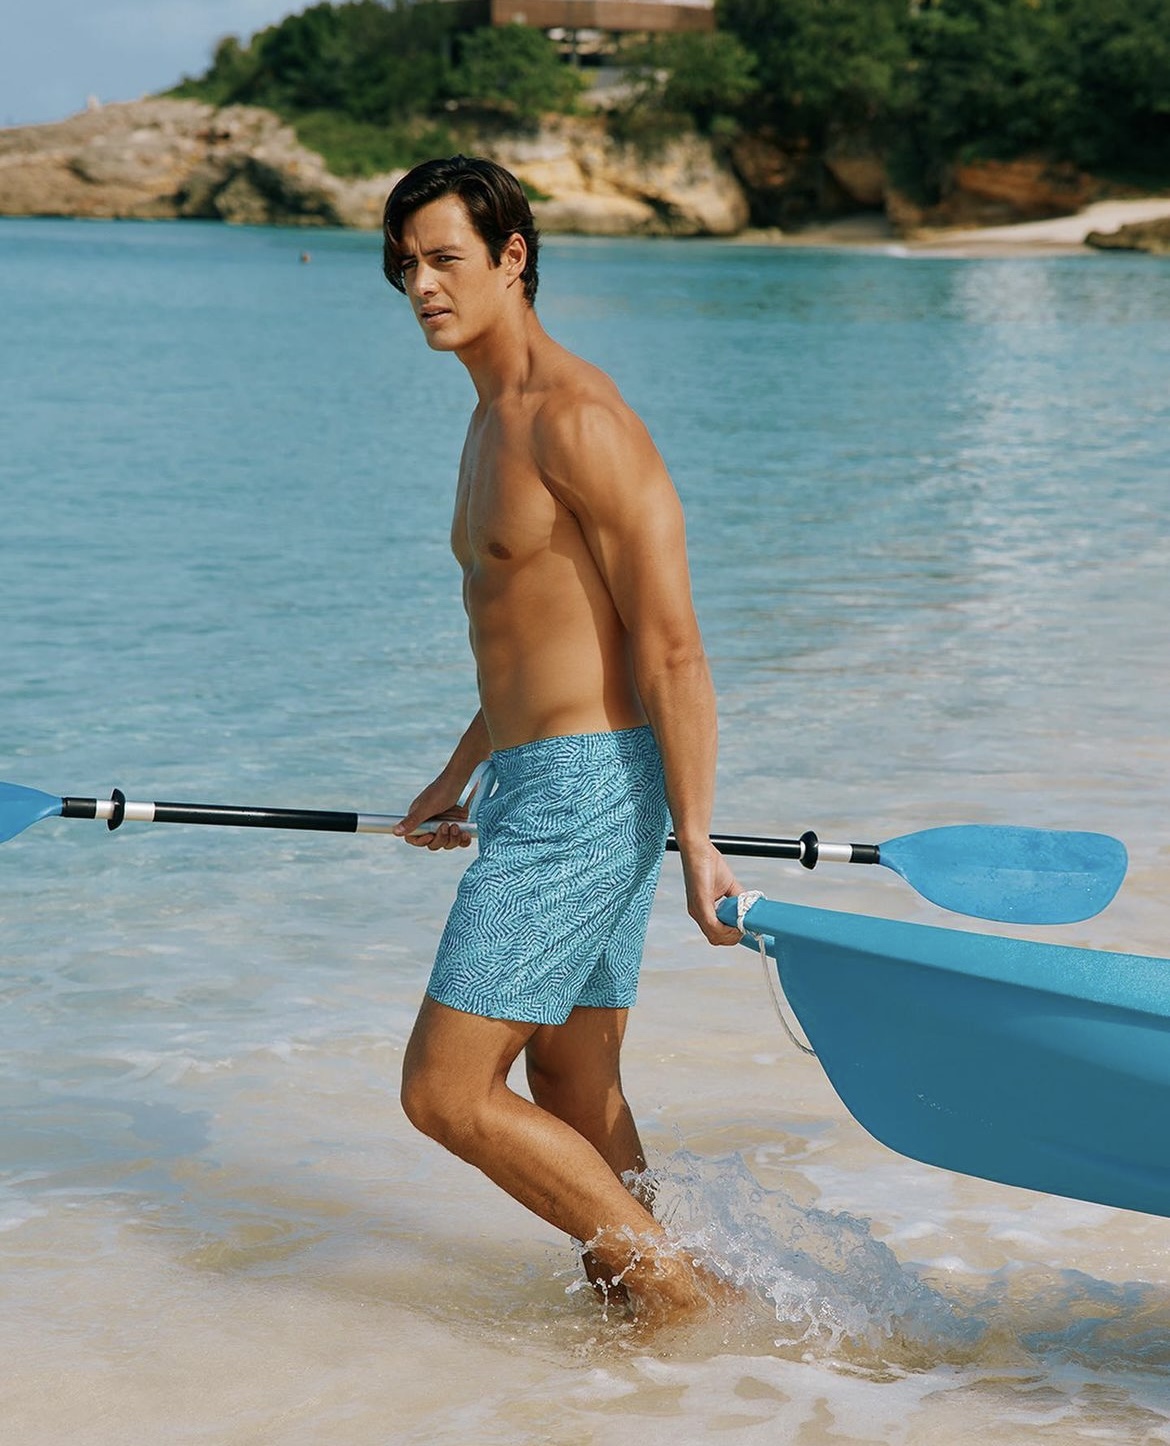 An image from Southern Tide showing a man entering the water with a paddle and kayak